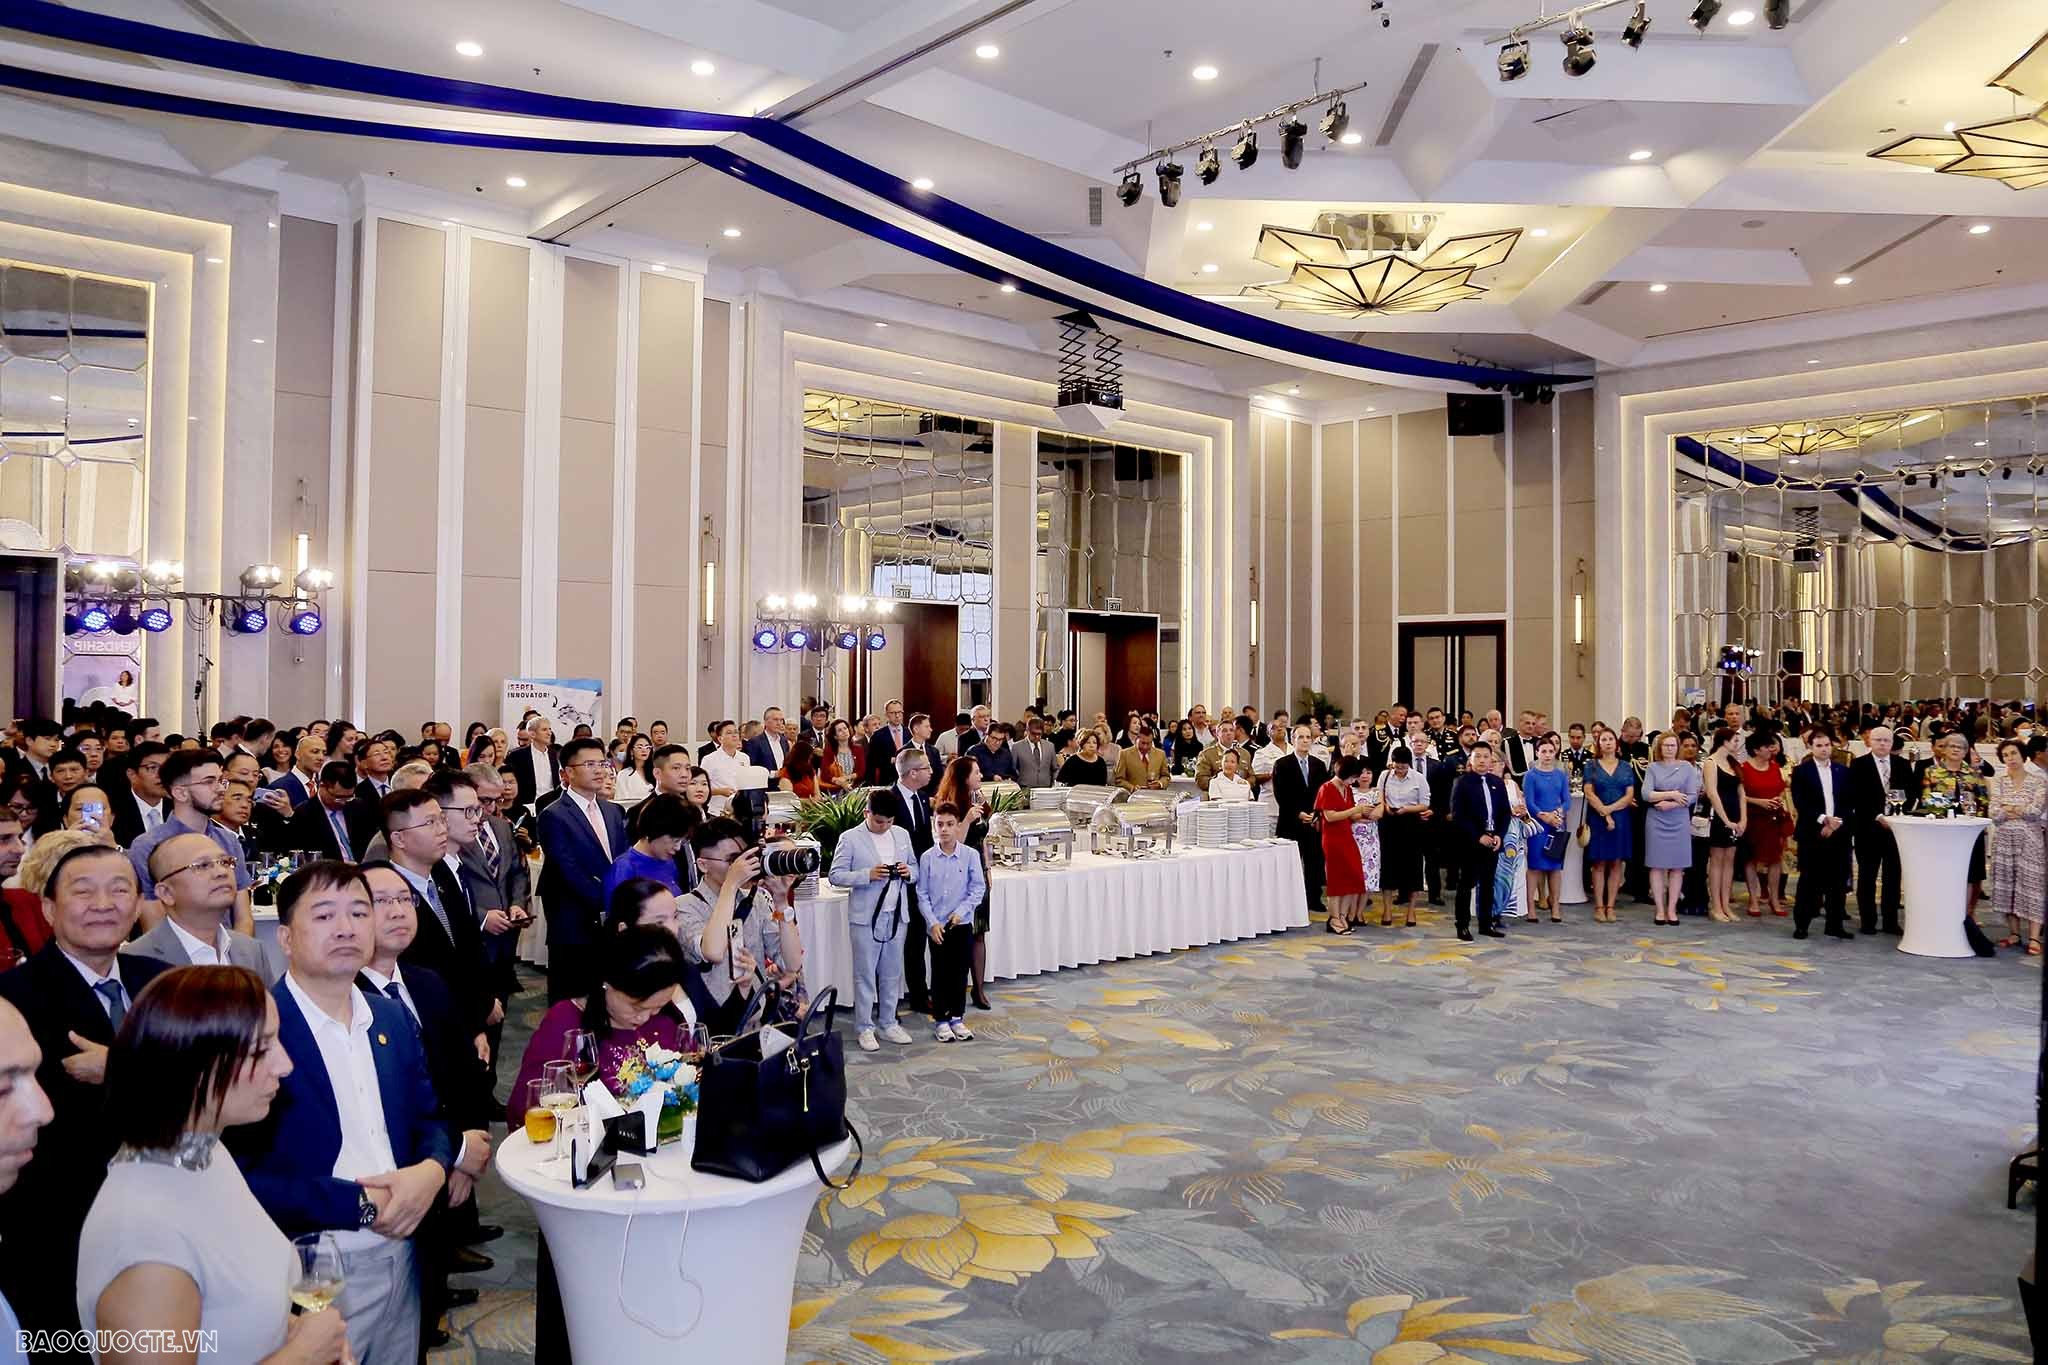 Ceremony to celebrate Israel’s 75th Independence Day in Hanoi